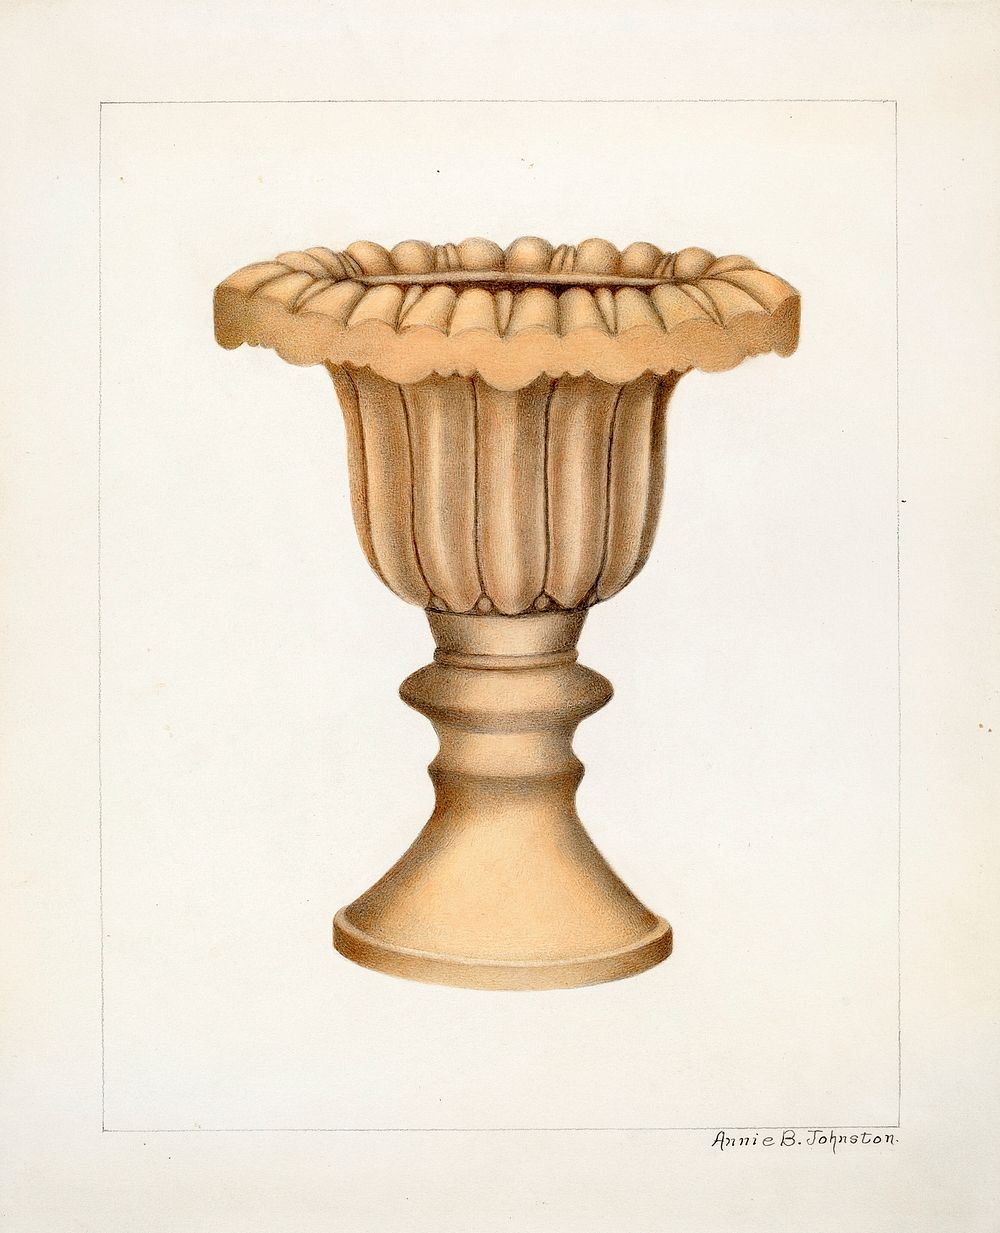 Pottery Vase (ca.1938) by Annie B. Johnston. Original from The National Galley of Art. Digitally enhanced by rawpixel.